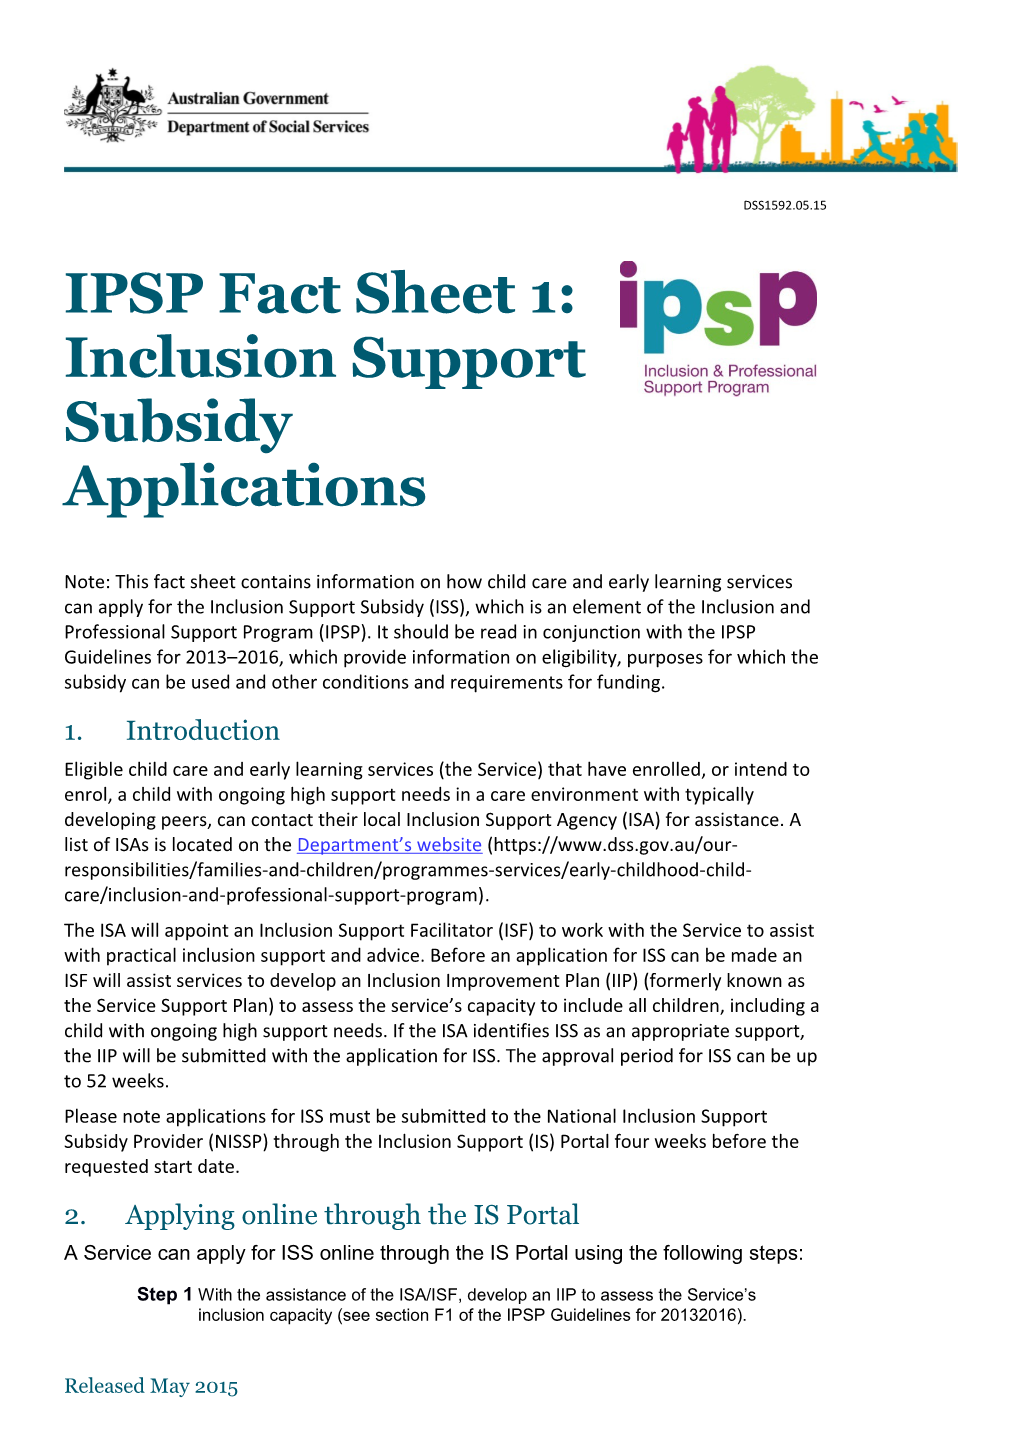 IPSP Fact Sheet 1: Inclusion Support Subsidy Applications